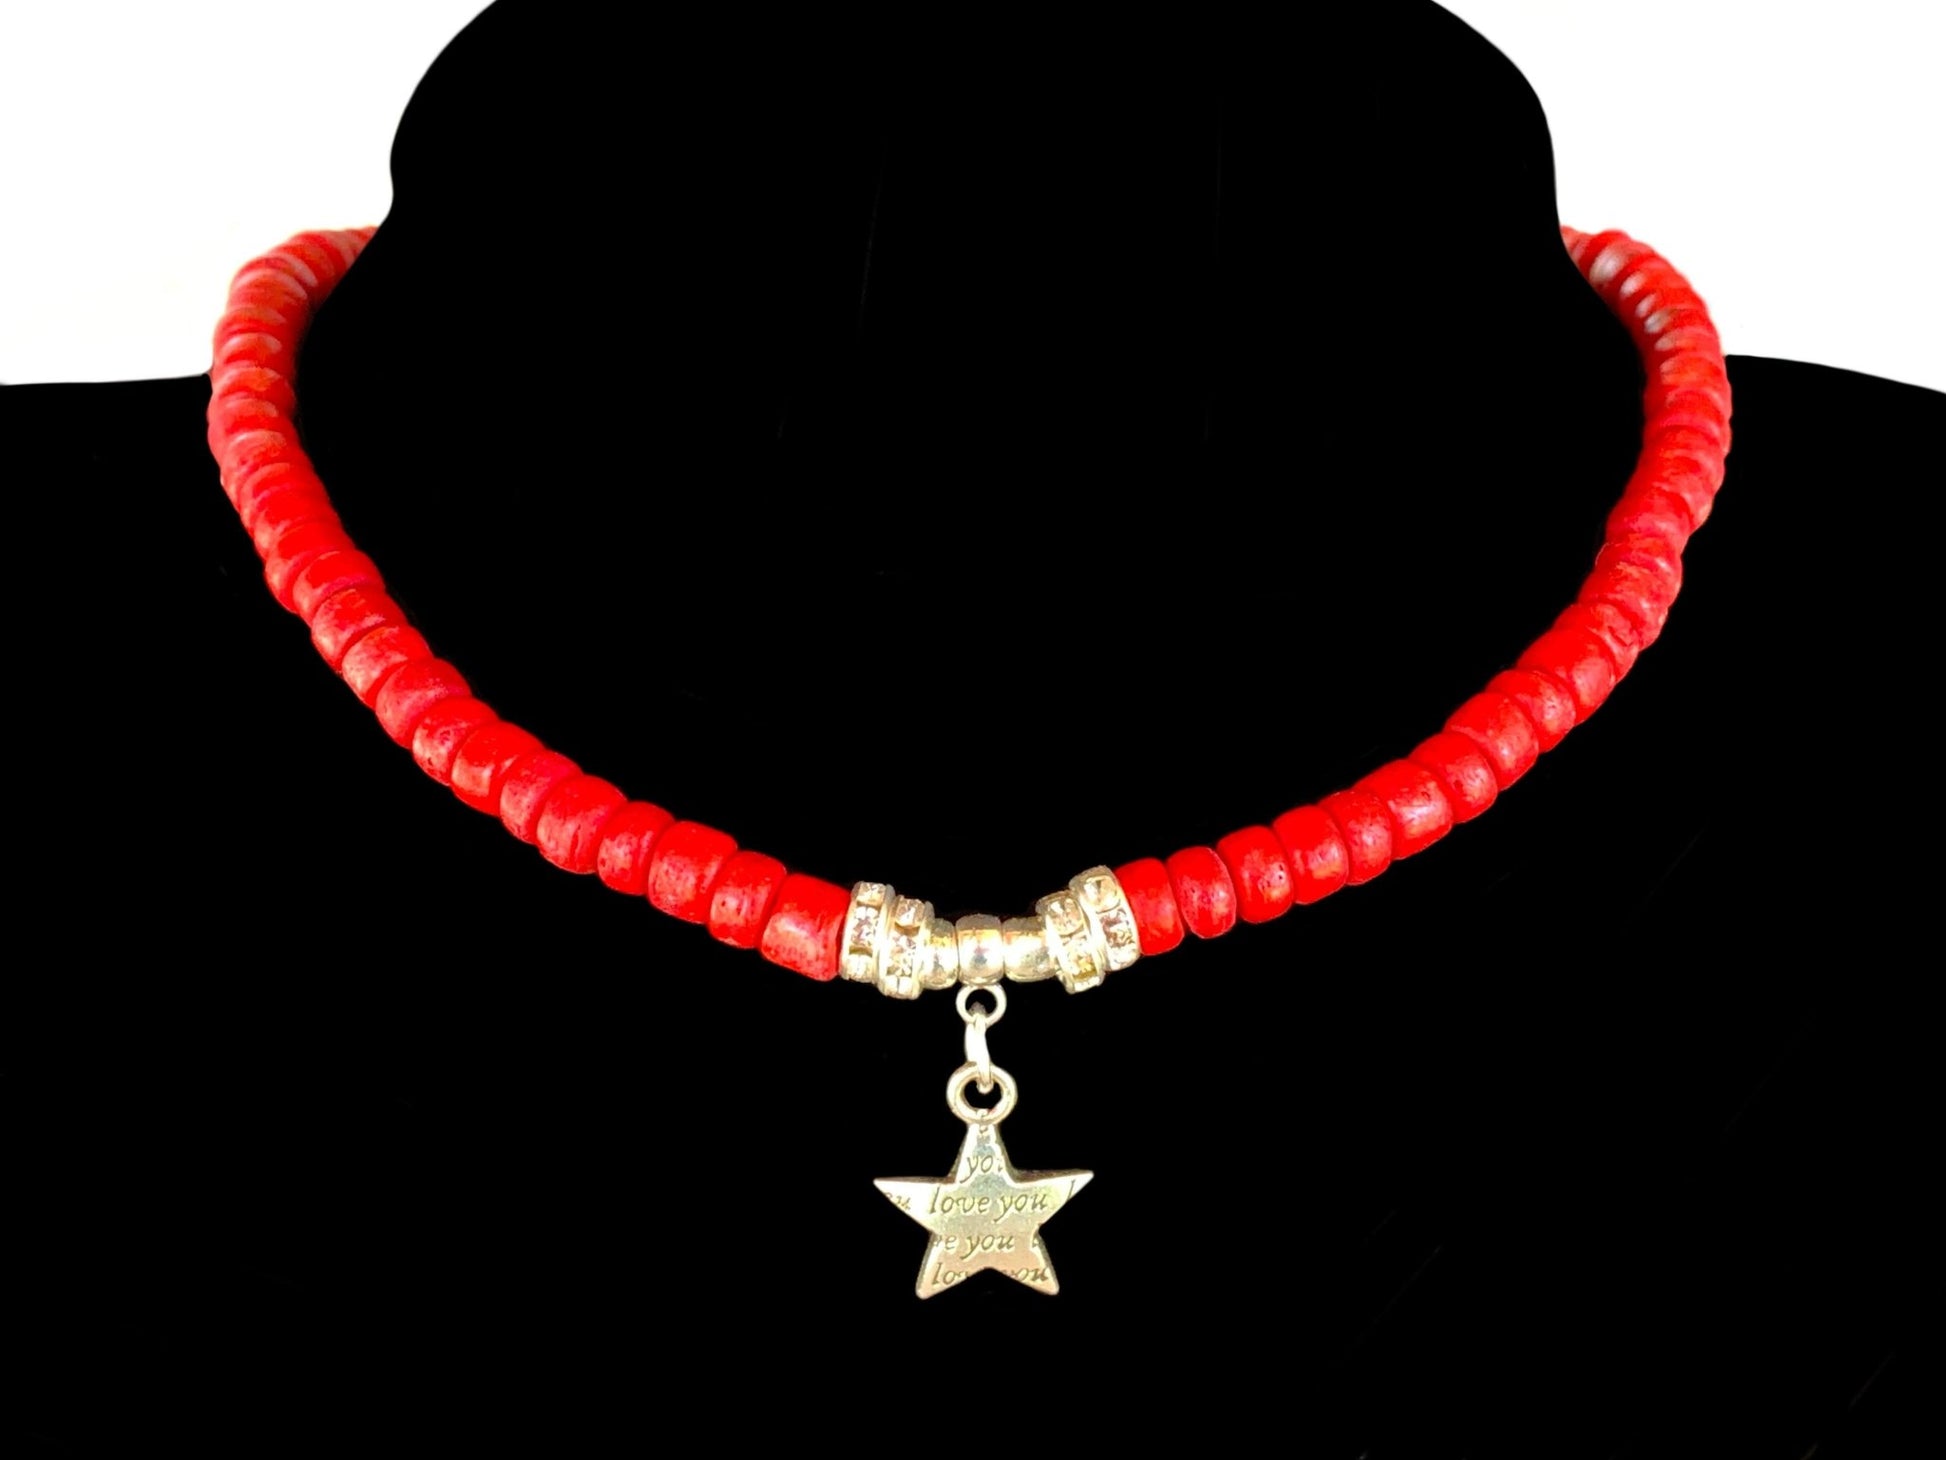 Holly Handmade Red Wood Beaded 22" Necklace with "I Love You" Star Pendant - Born Mystics